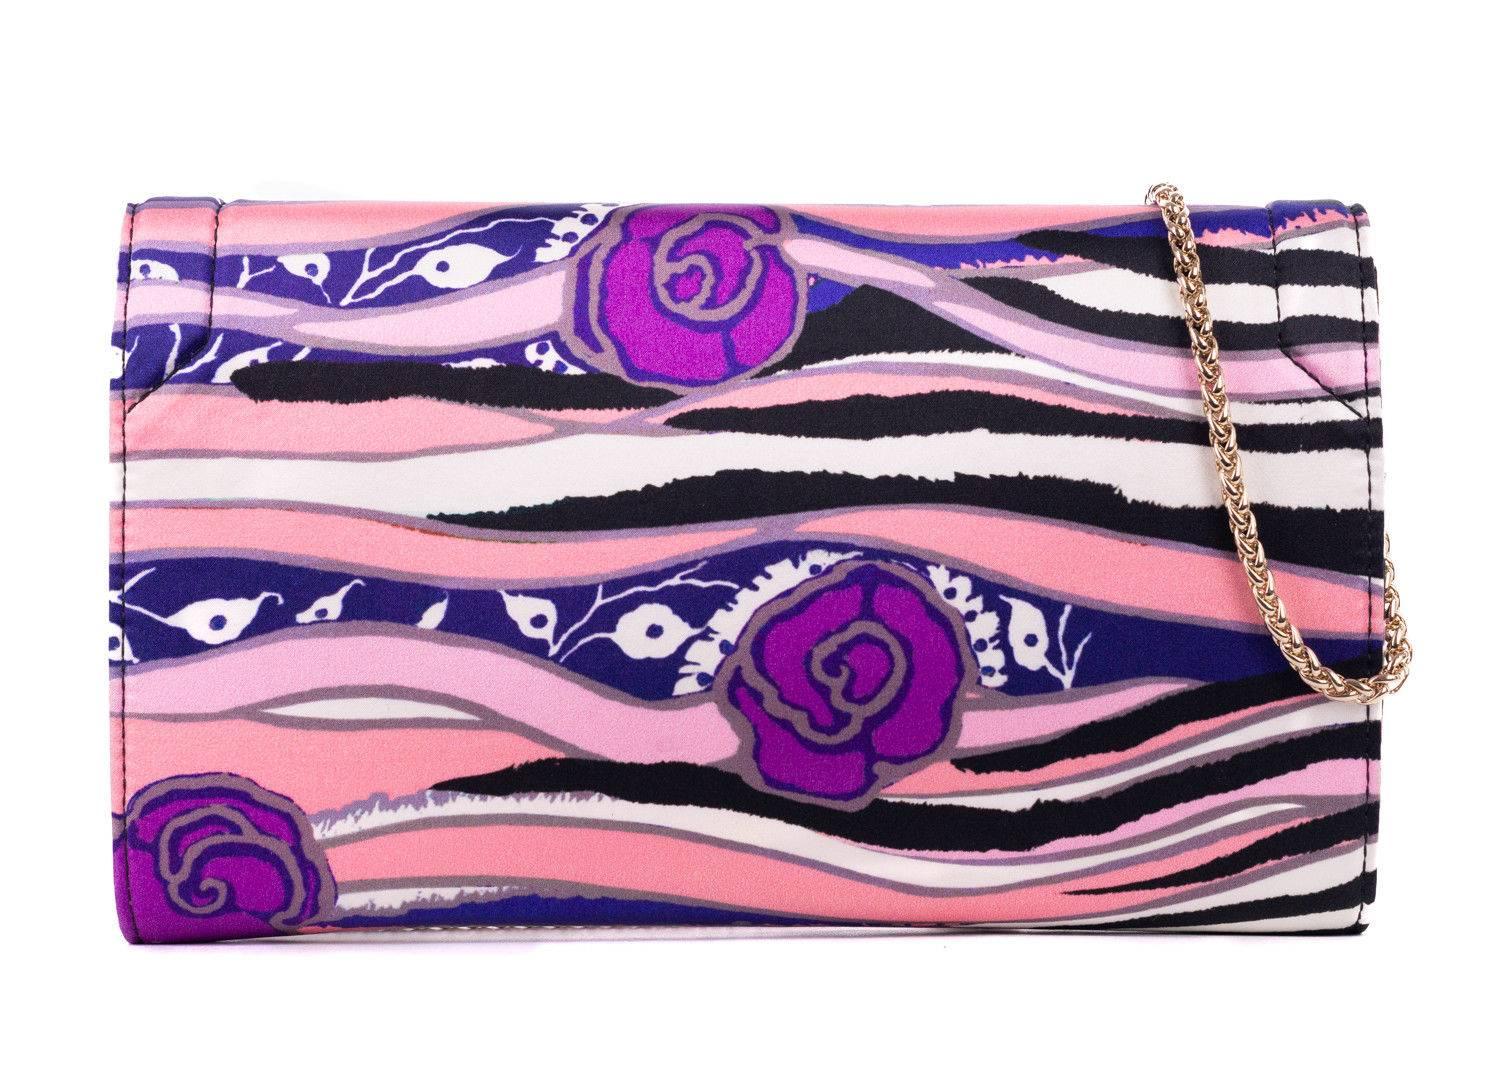 Roberto Cavalli Multicolor Pink Satin Floral Clutch Shoulder Bag In New Condition For Sale In Brooklyn, NY